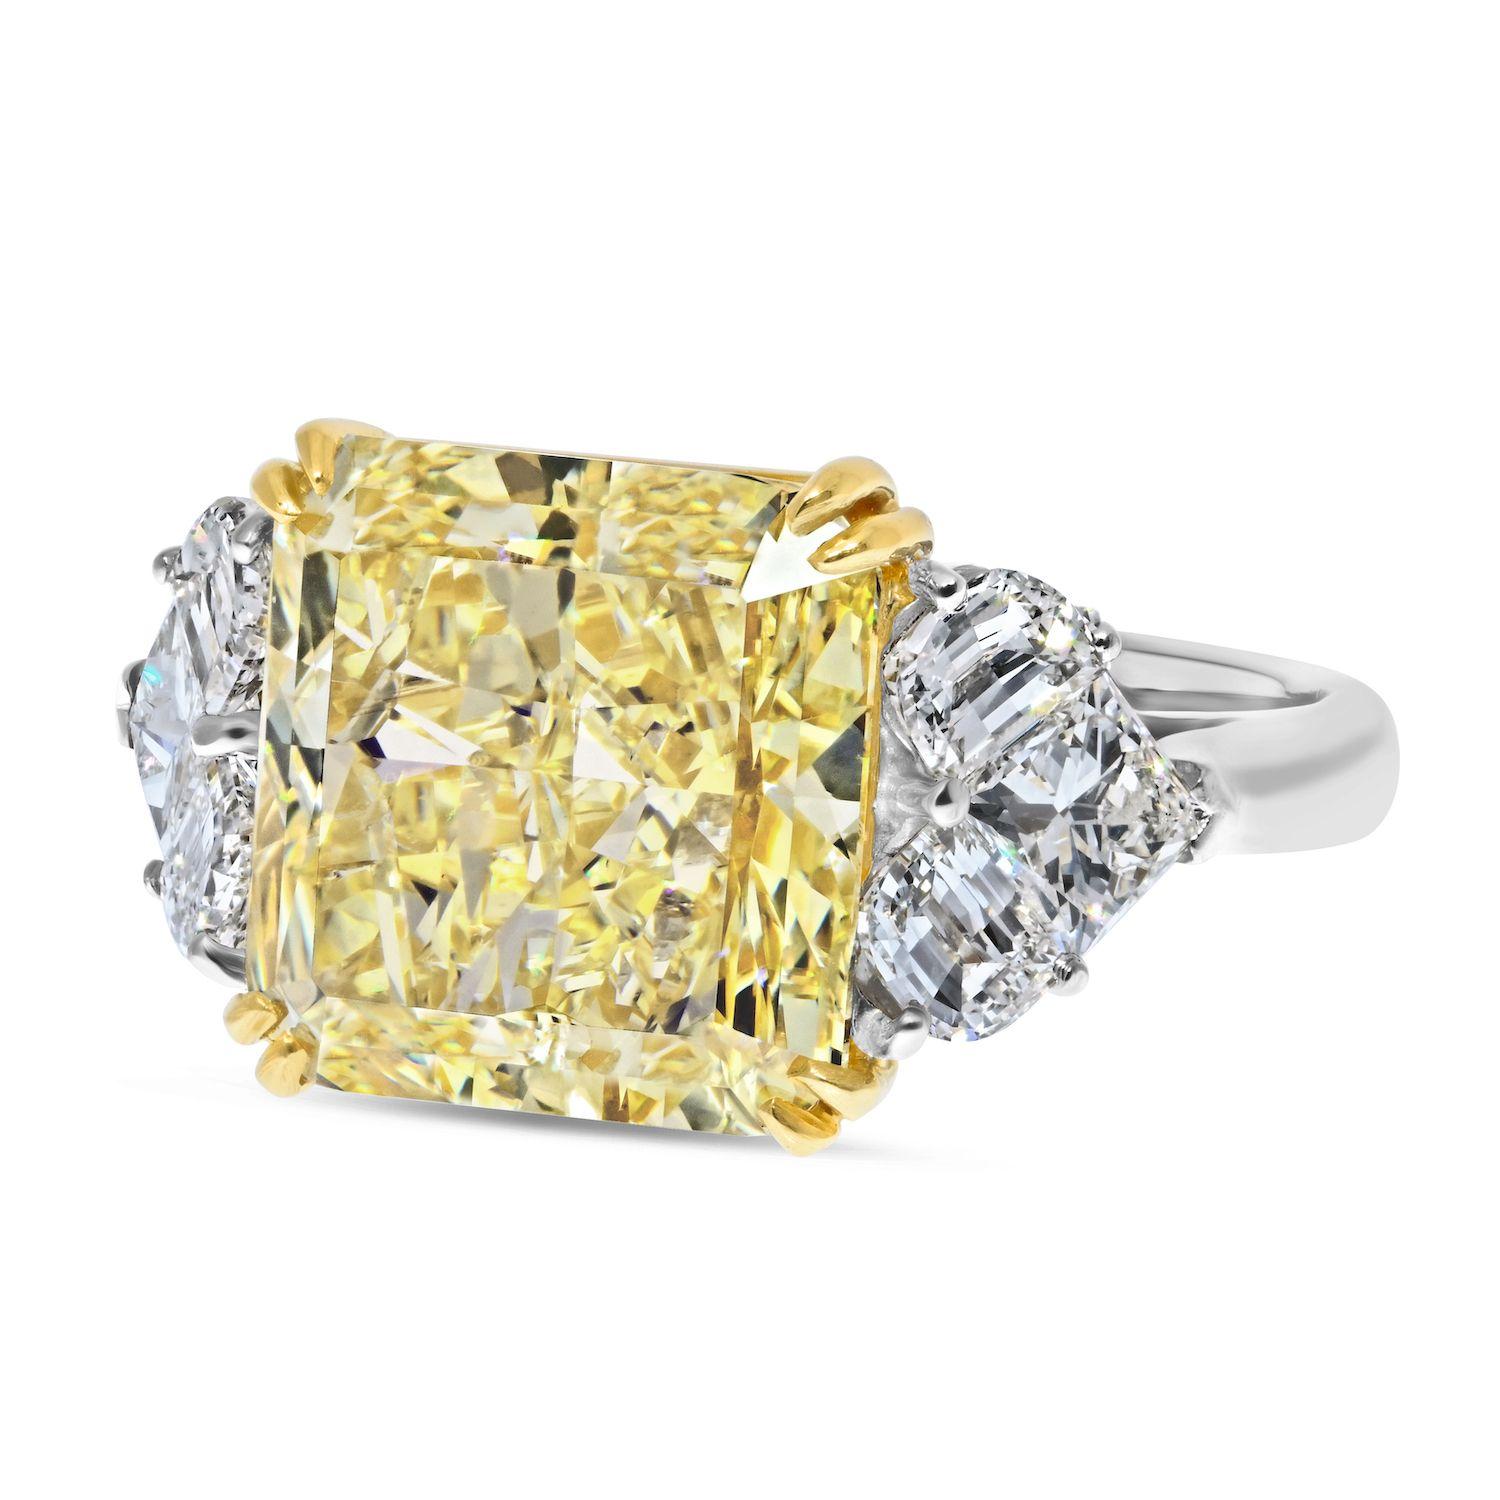 Modern 12.96 Carat Radiant Cut Diamond Fancy Yellow SI1 GIA Engagement Ring For Sale